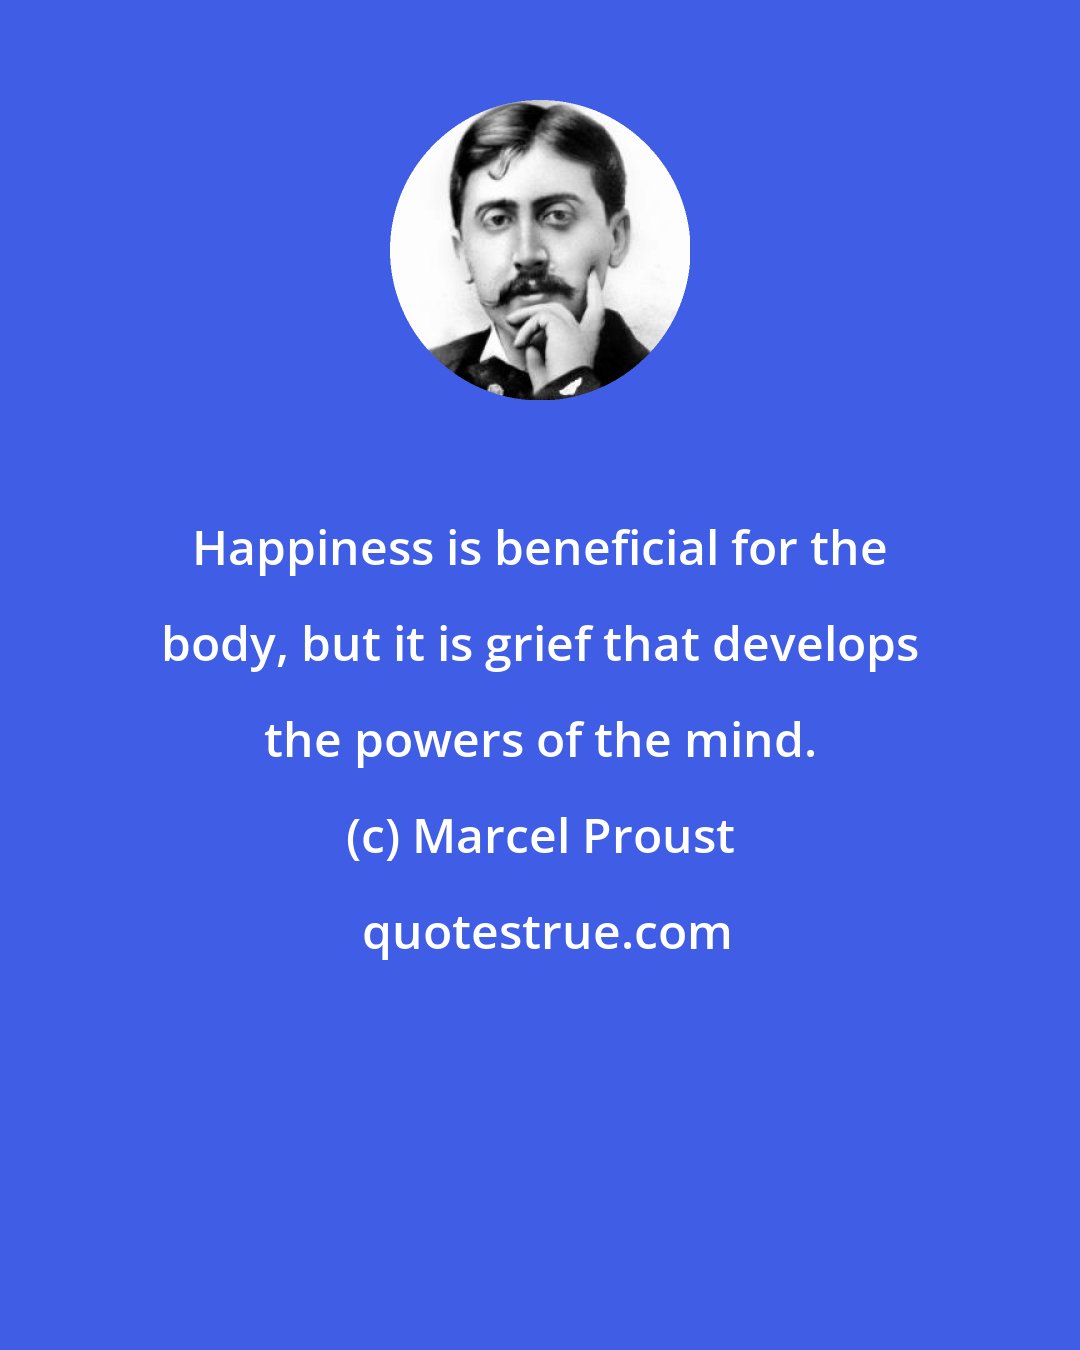 Marcel Proust: Happiness is beneficial for the body, but it is grief that develops the powers of the mind.